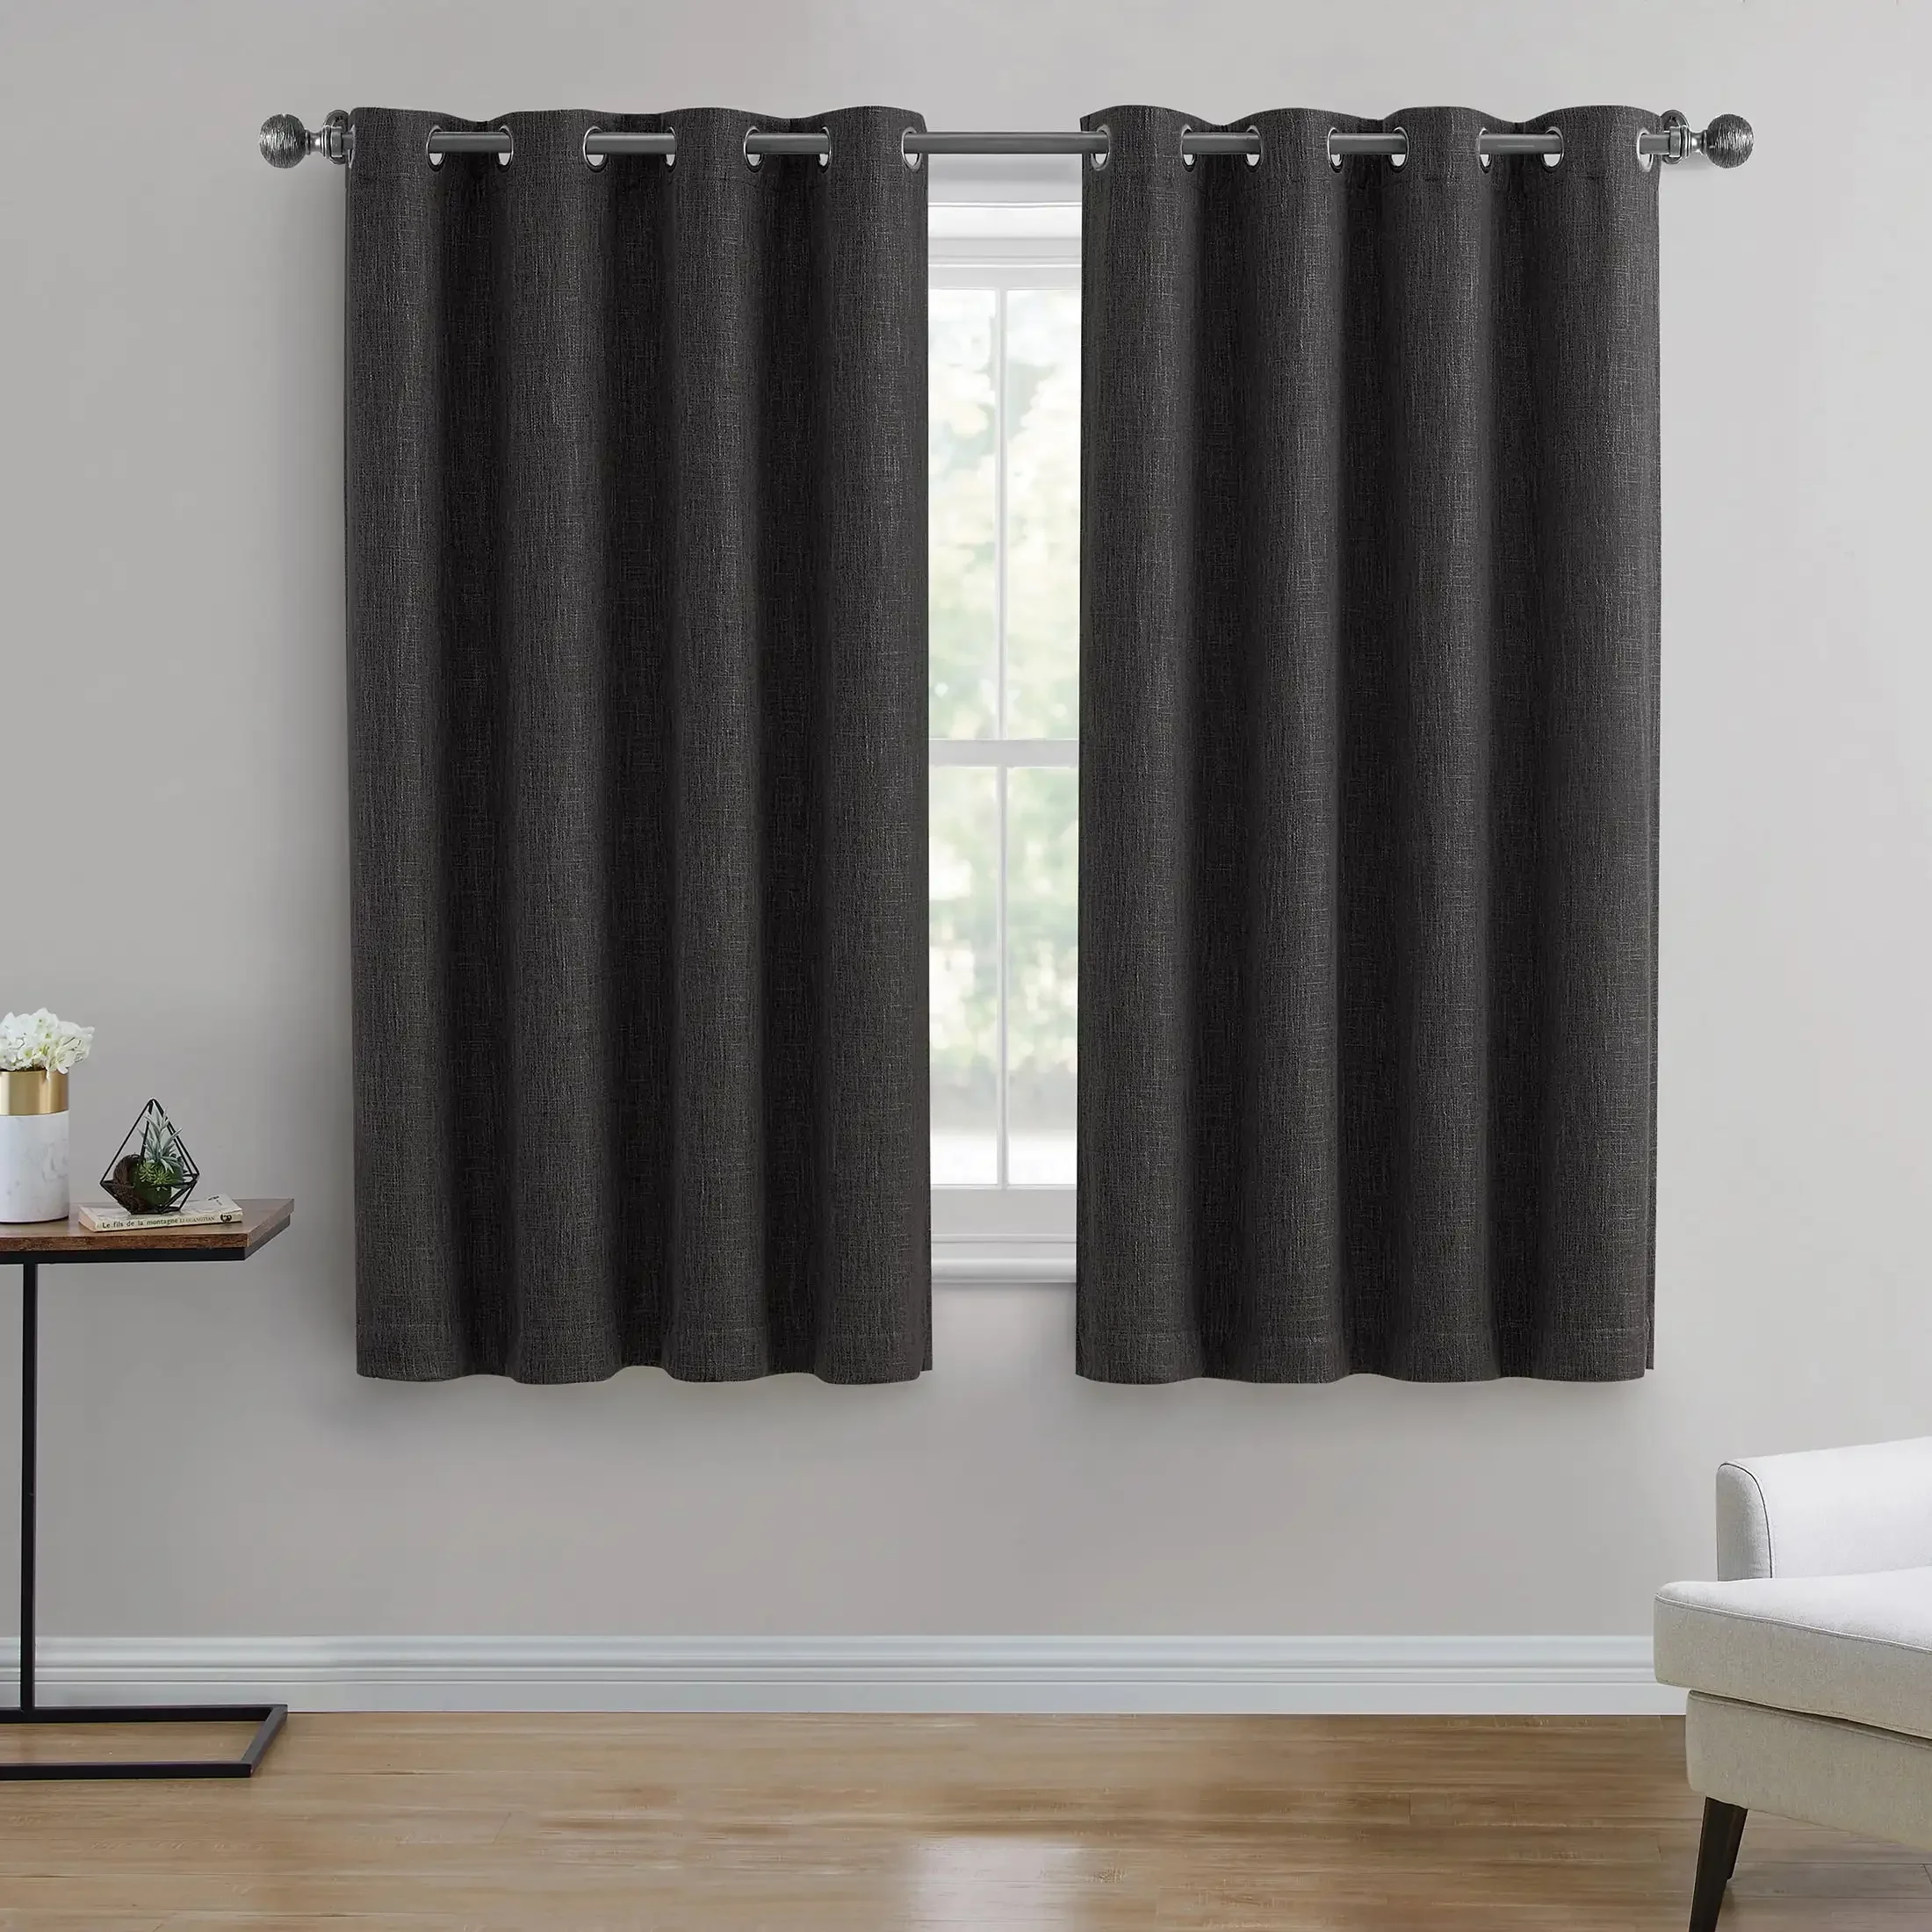 

Woven Textured Grommet Blackout Curtain Panel, Black, 50" x 63"， drapes in living room